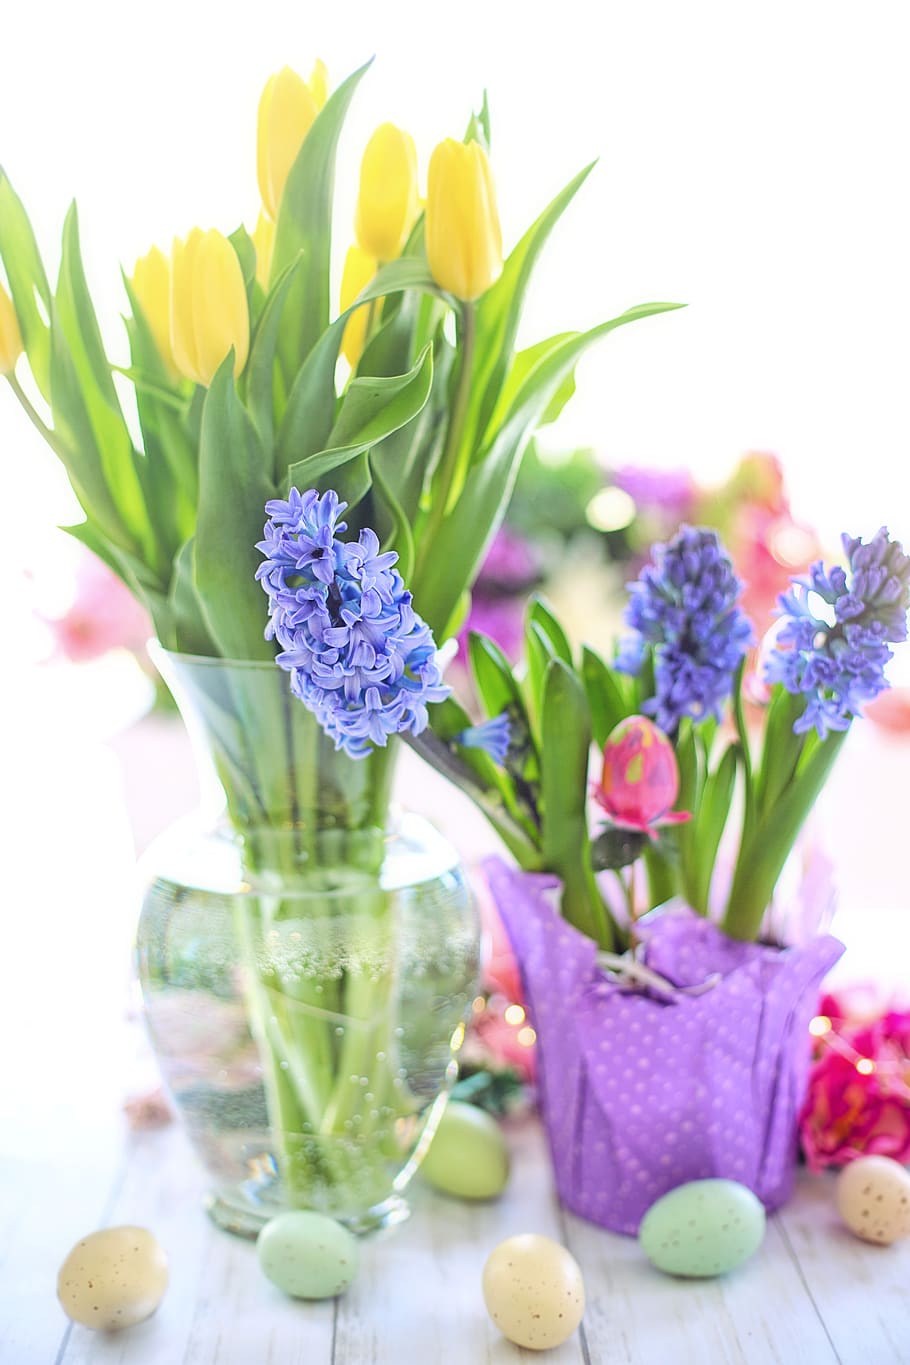 easter, hyacinth, purple, eggs, flowers, spring, nature, blossoms, yellow, tulips